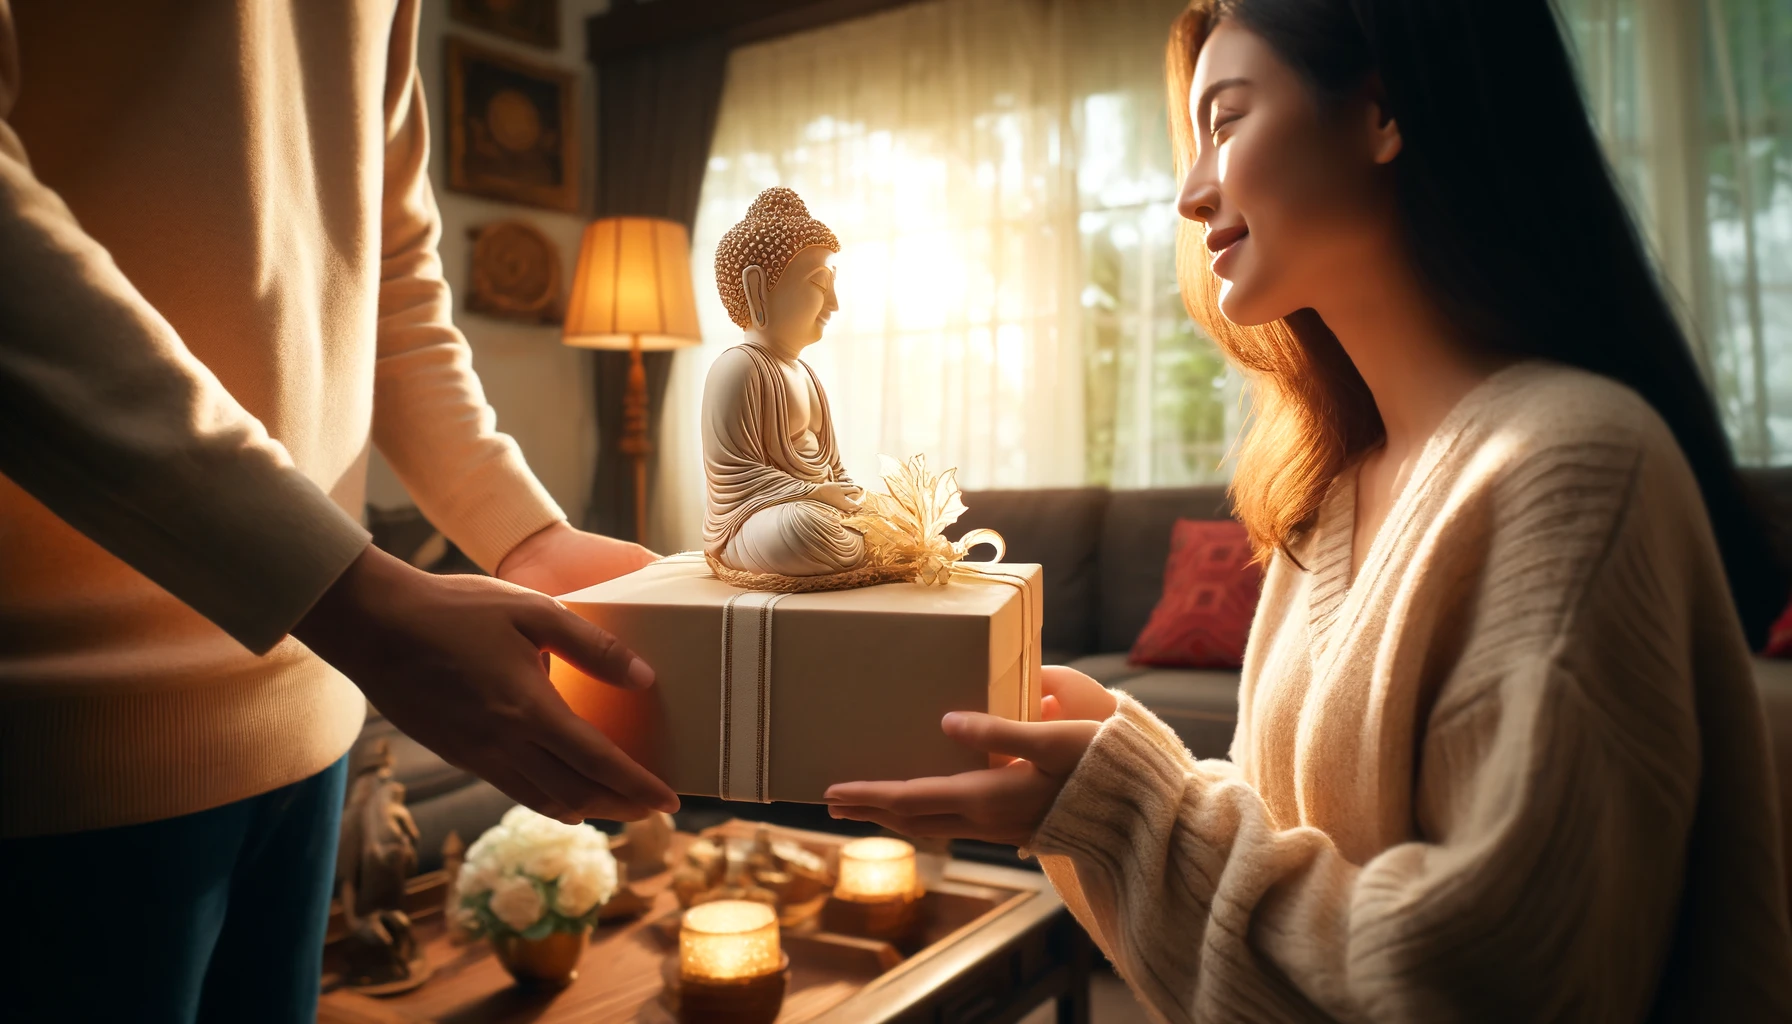 A warm and touching scene of someone gifting a buddha home decor item to someone else set in a cozy living space. the giver is handing over a beautiful present.